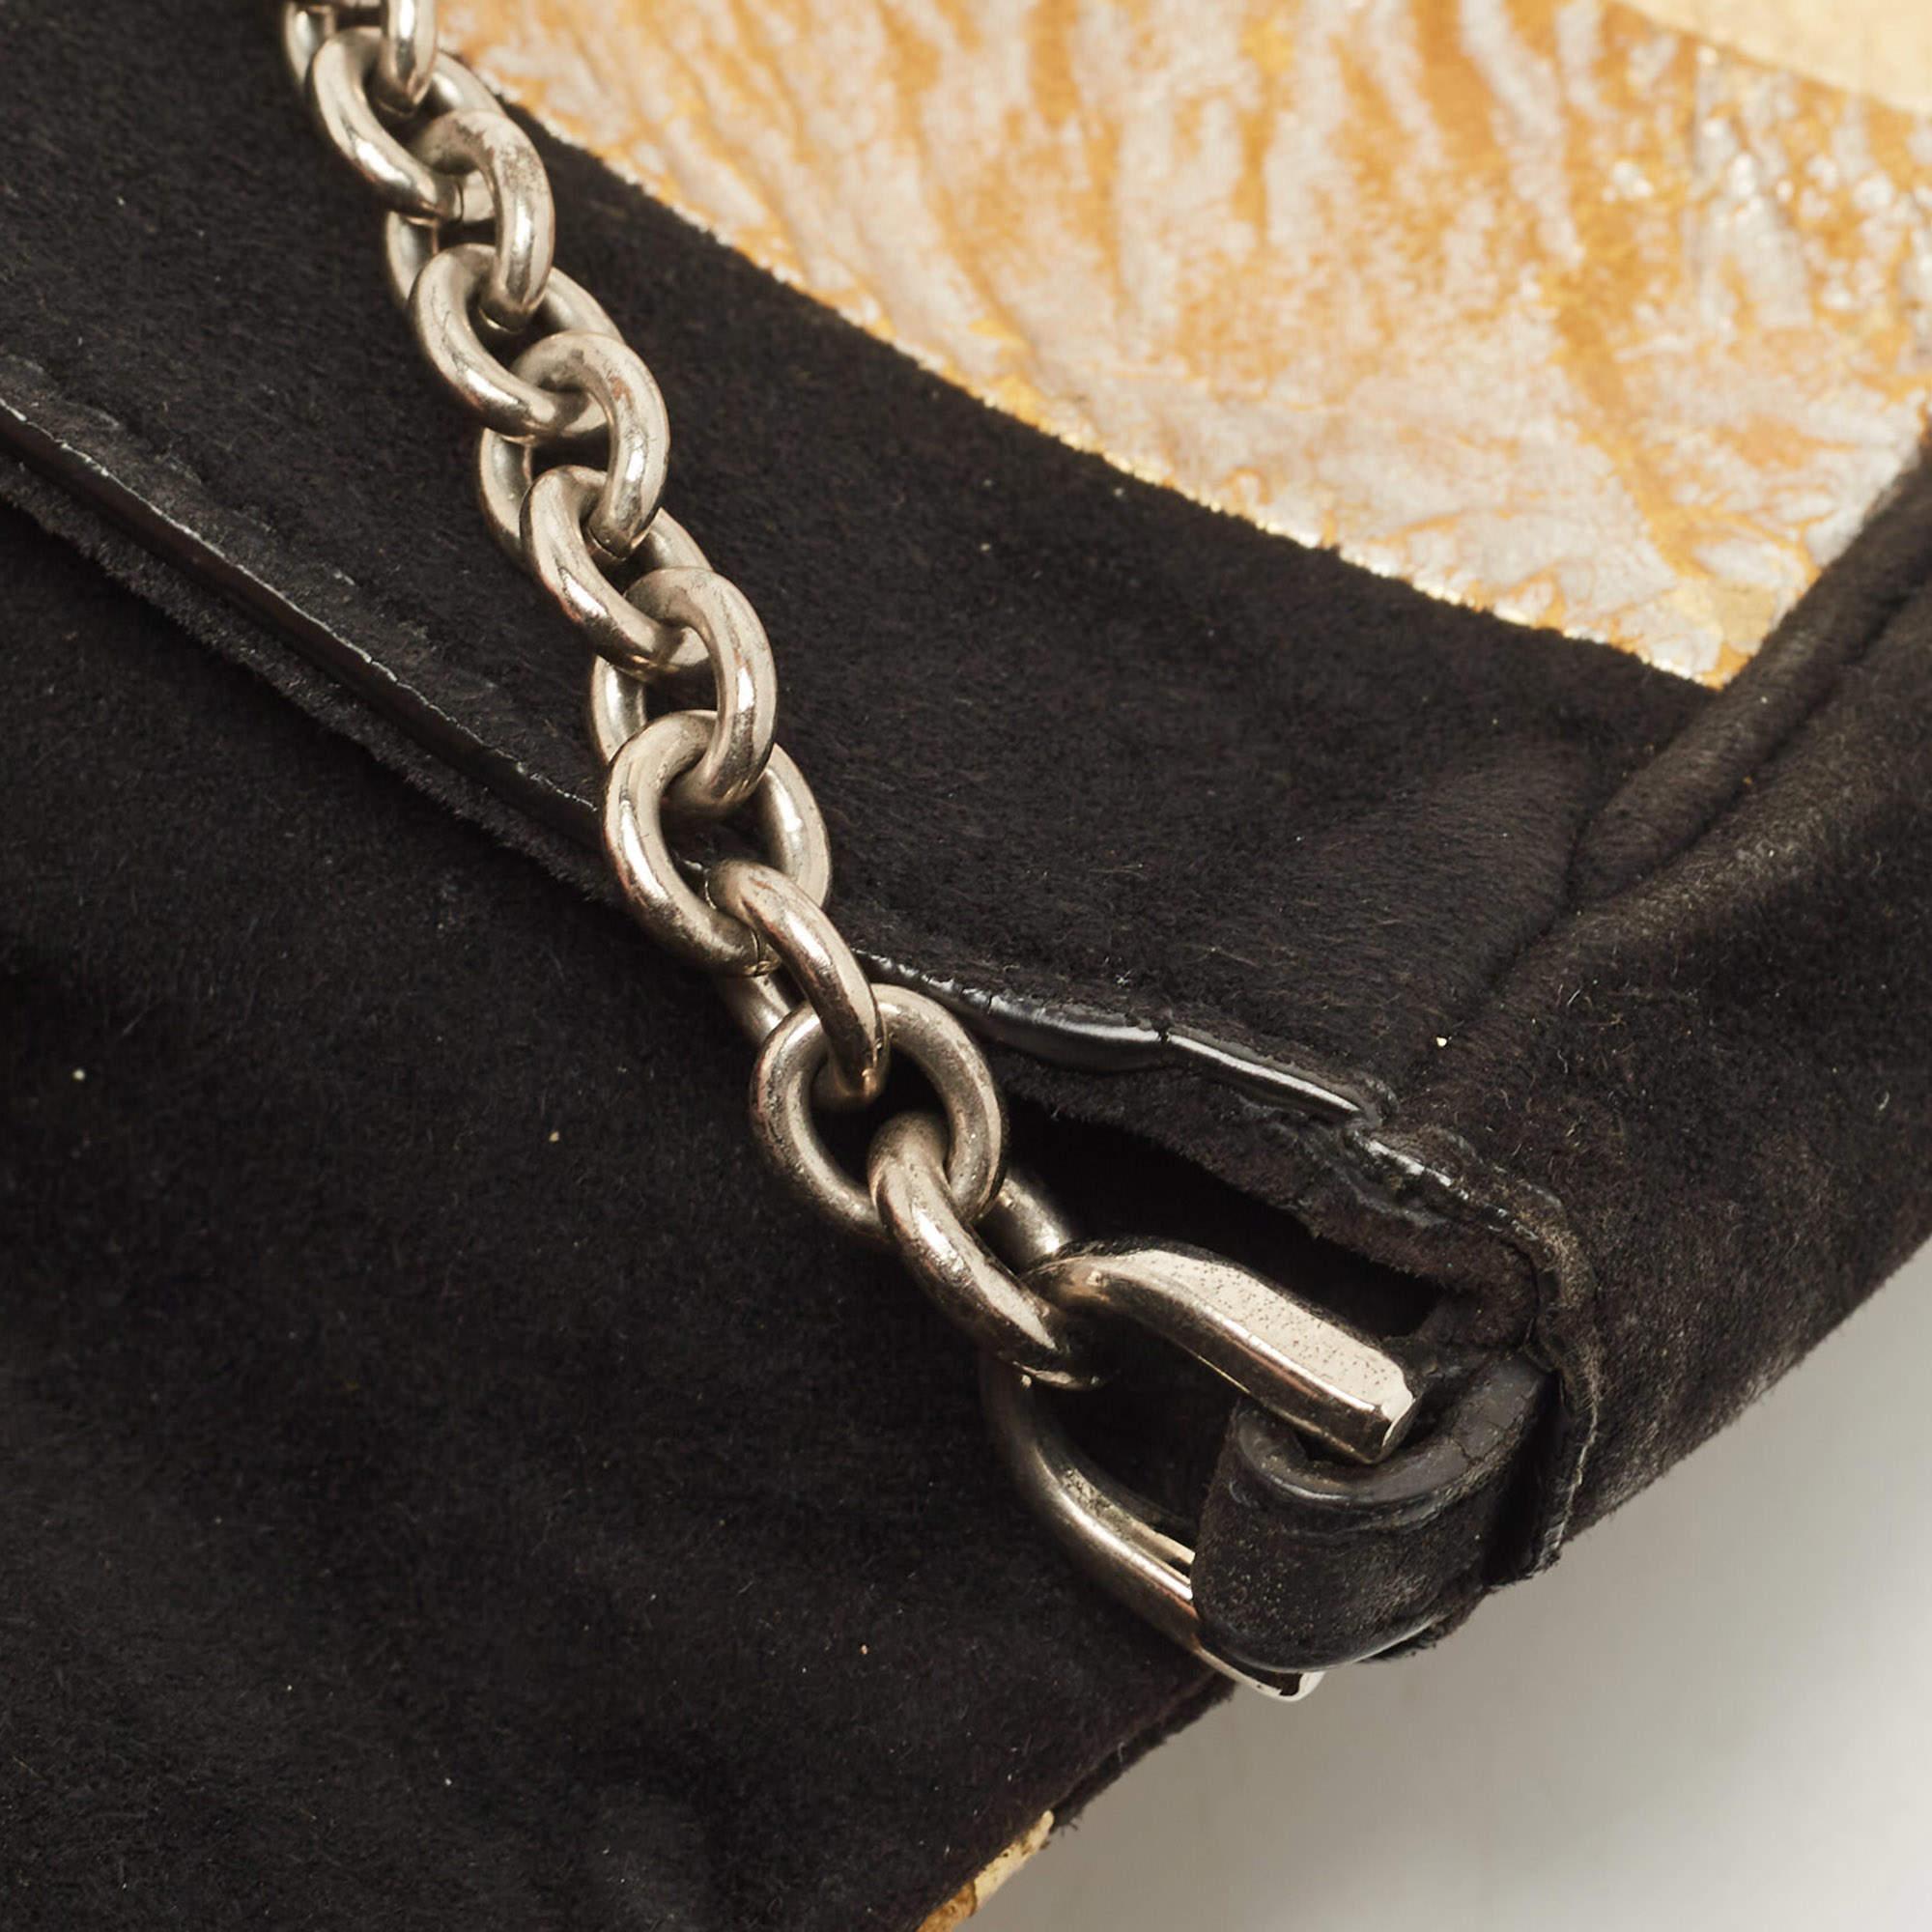 Dolce & Gabbana Black/Brown Suede And Snakeskin Leather Chain Clutch For Sale 7